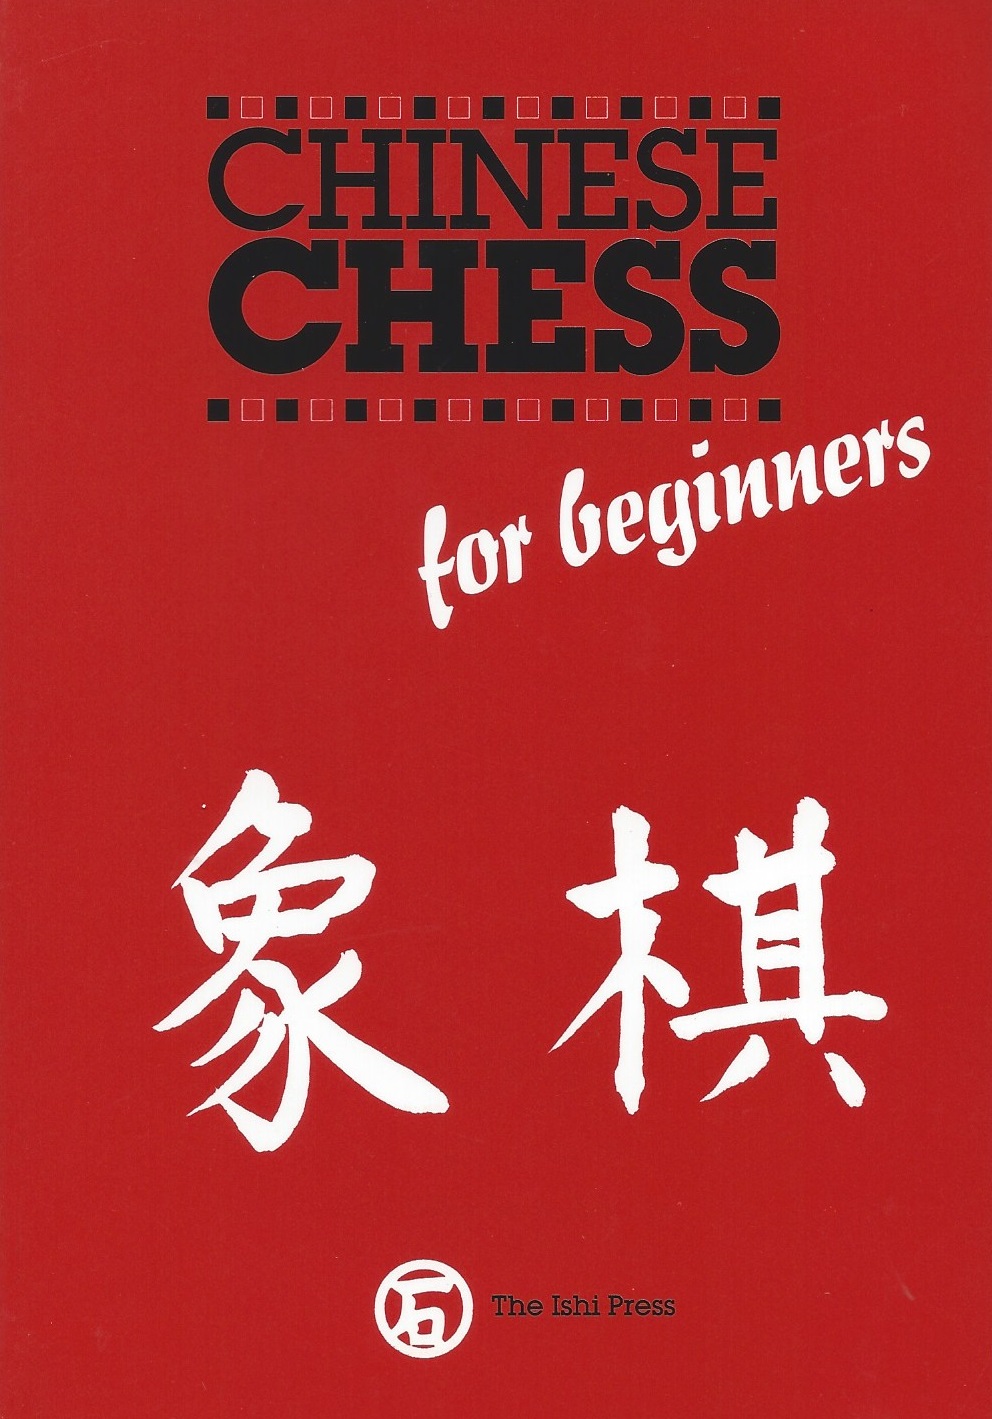 Chinese Chess for beginners, Sloan